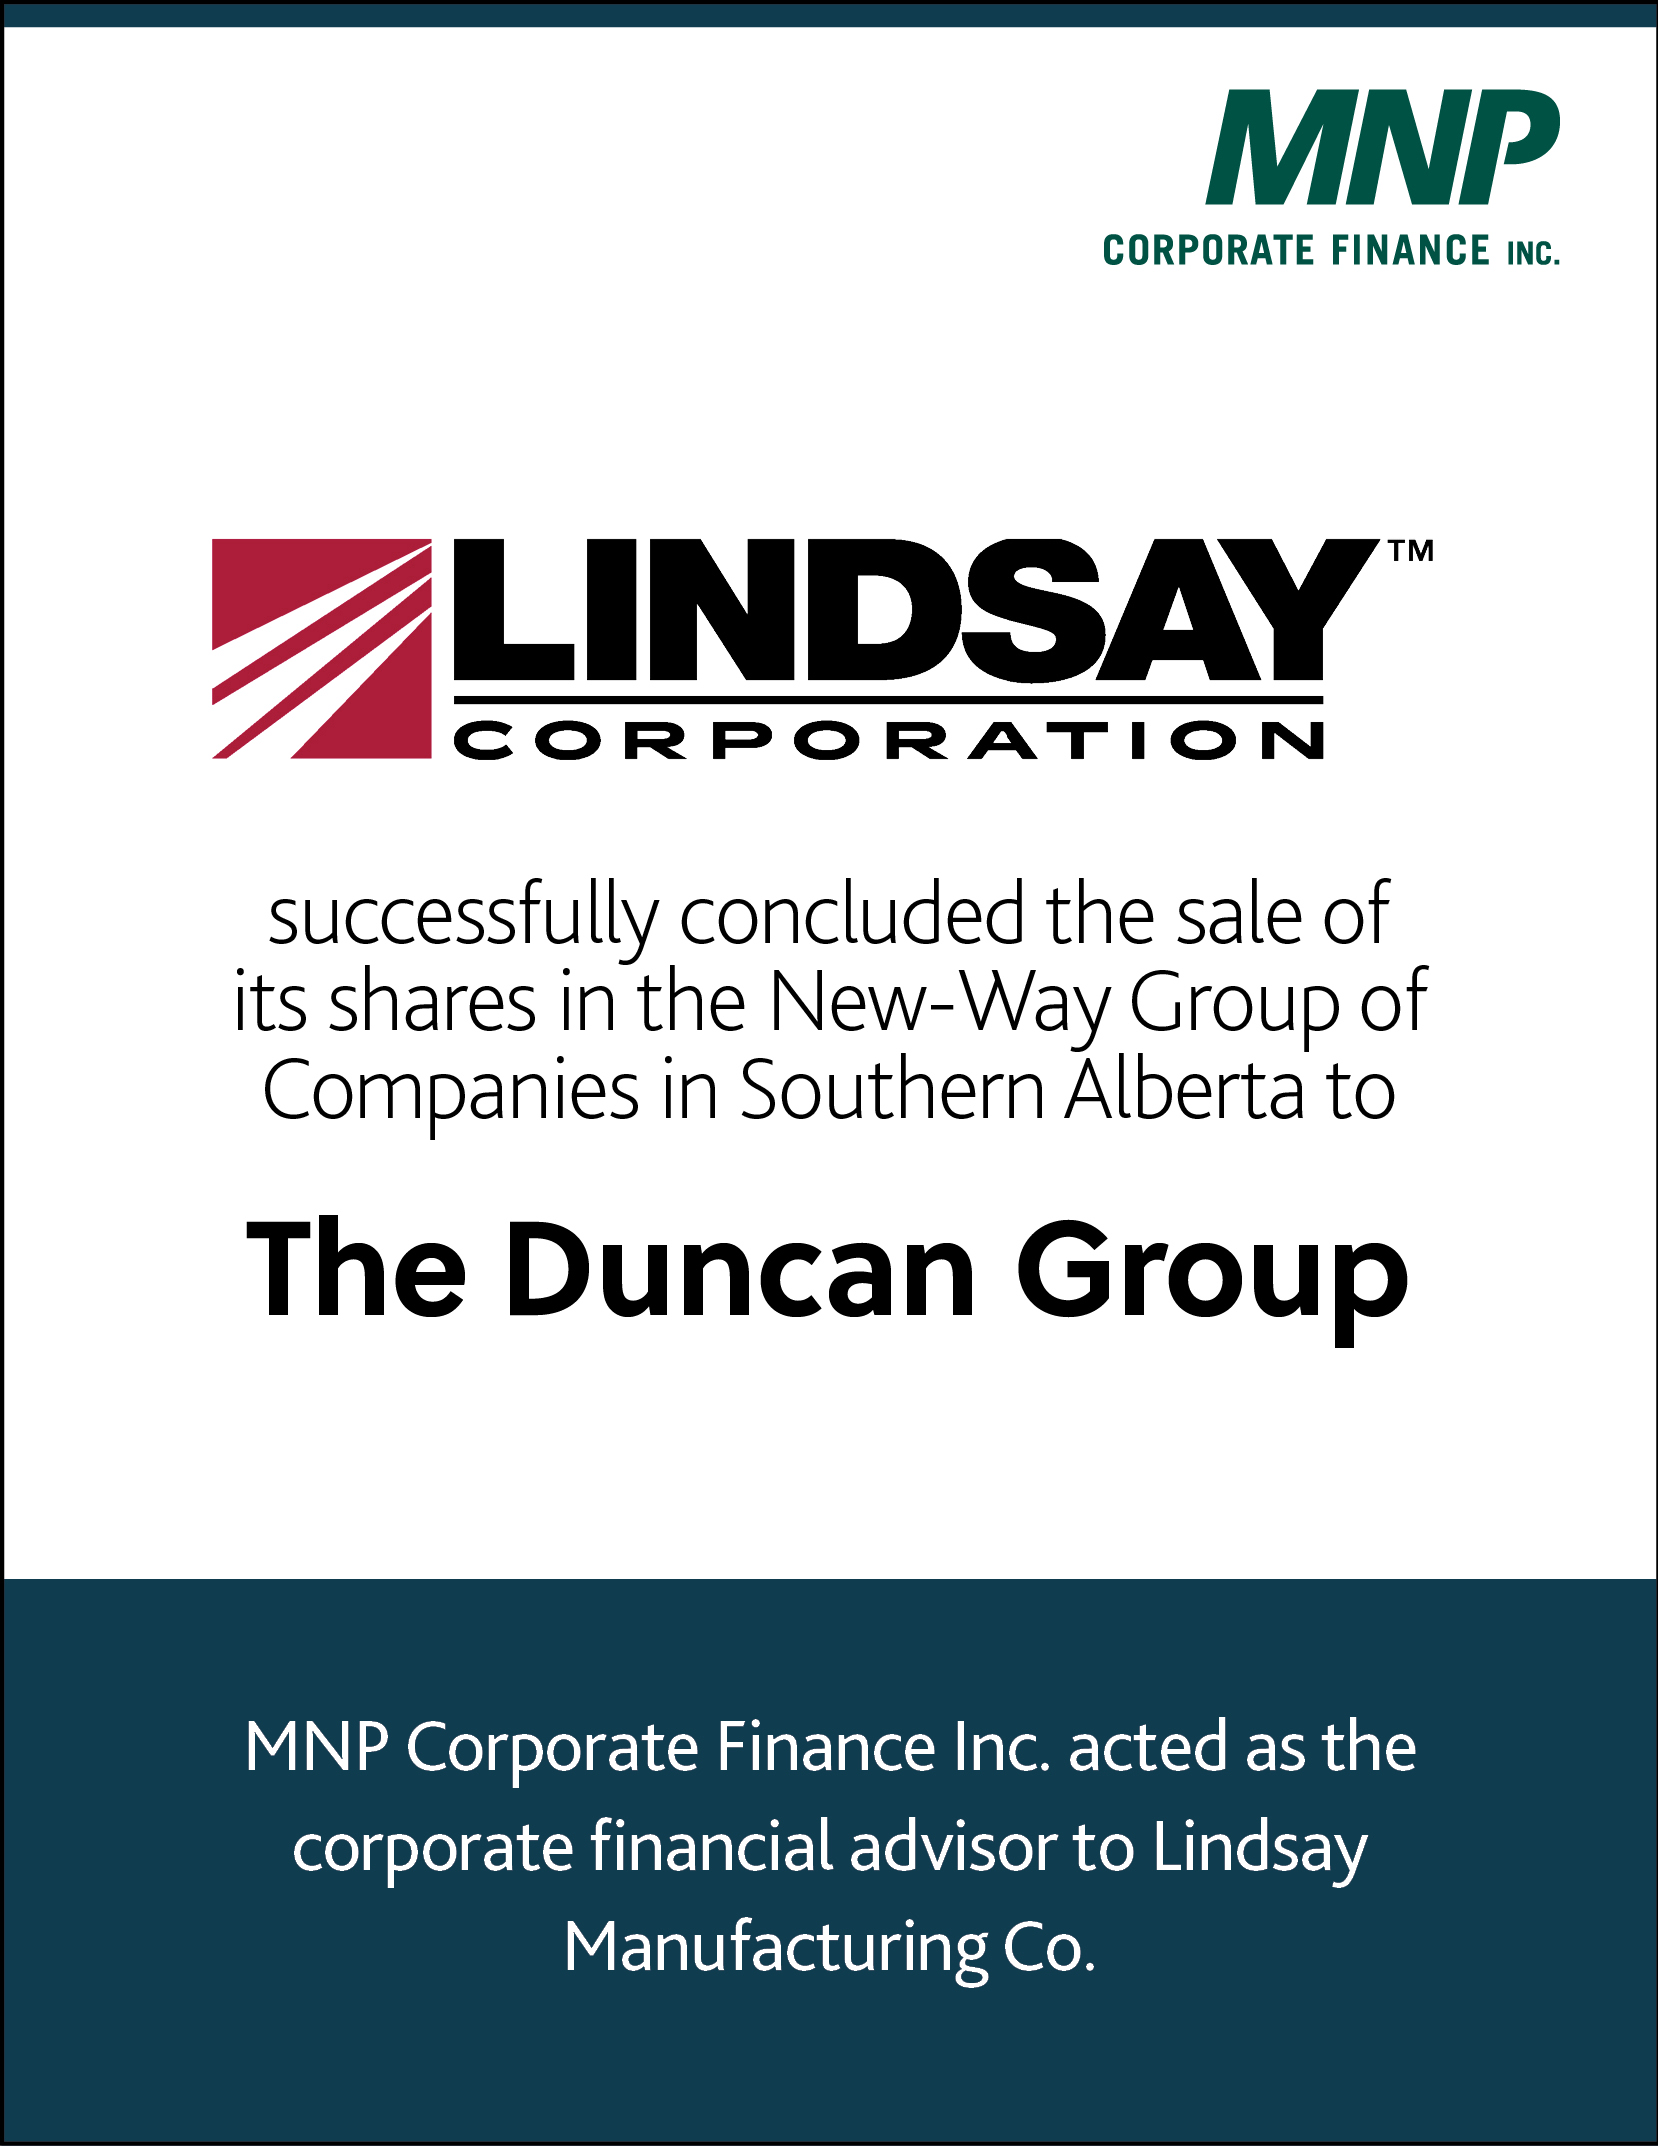 Lindsay Corporation successfully concluded the sale its shares in the New-Way Group of Companies in Southern Alberta to The Duncan Group. 